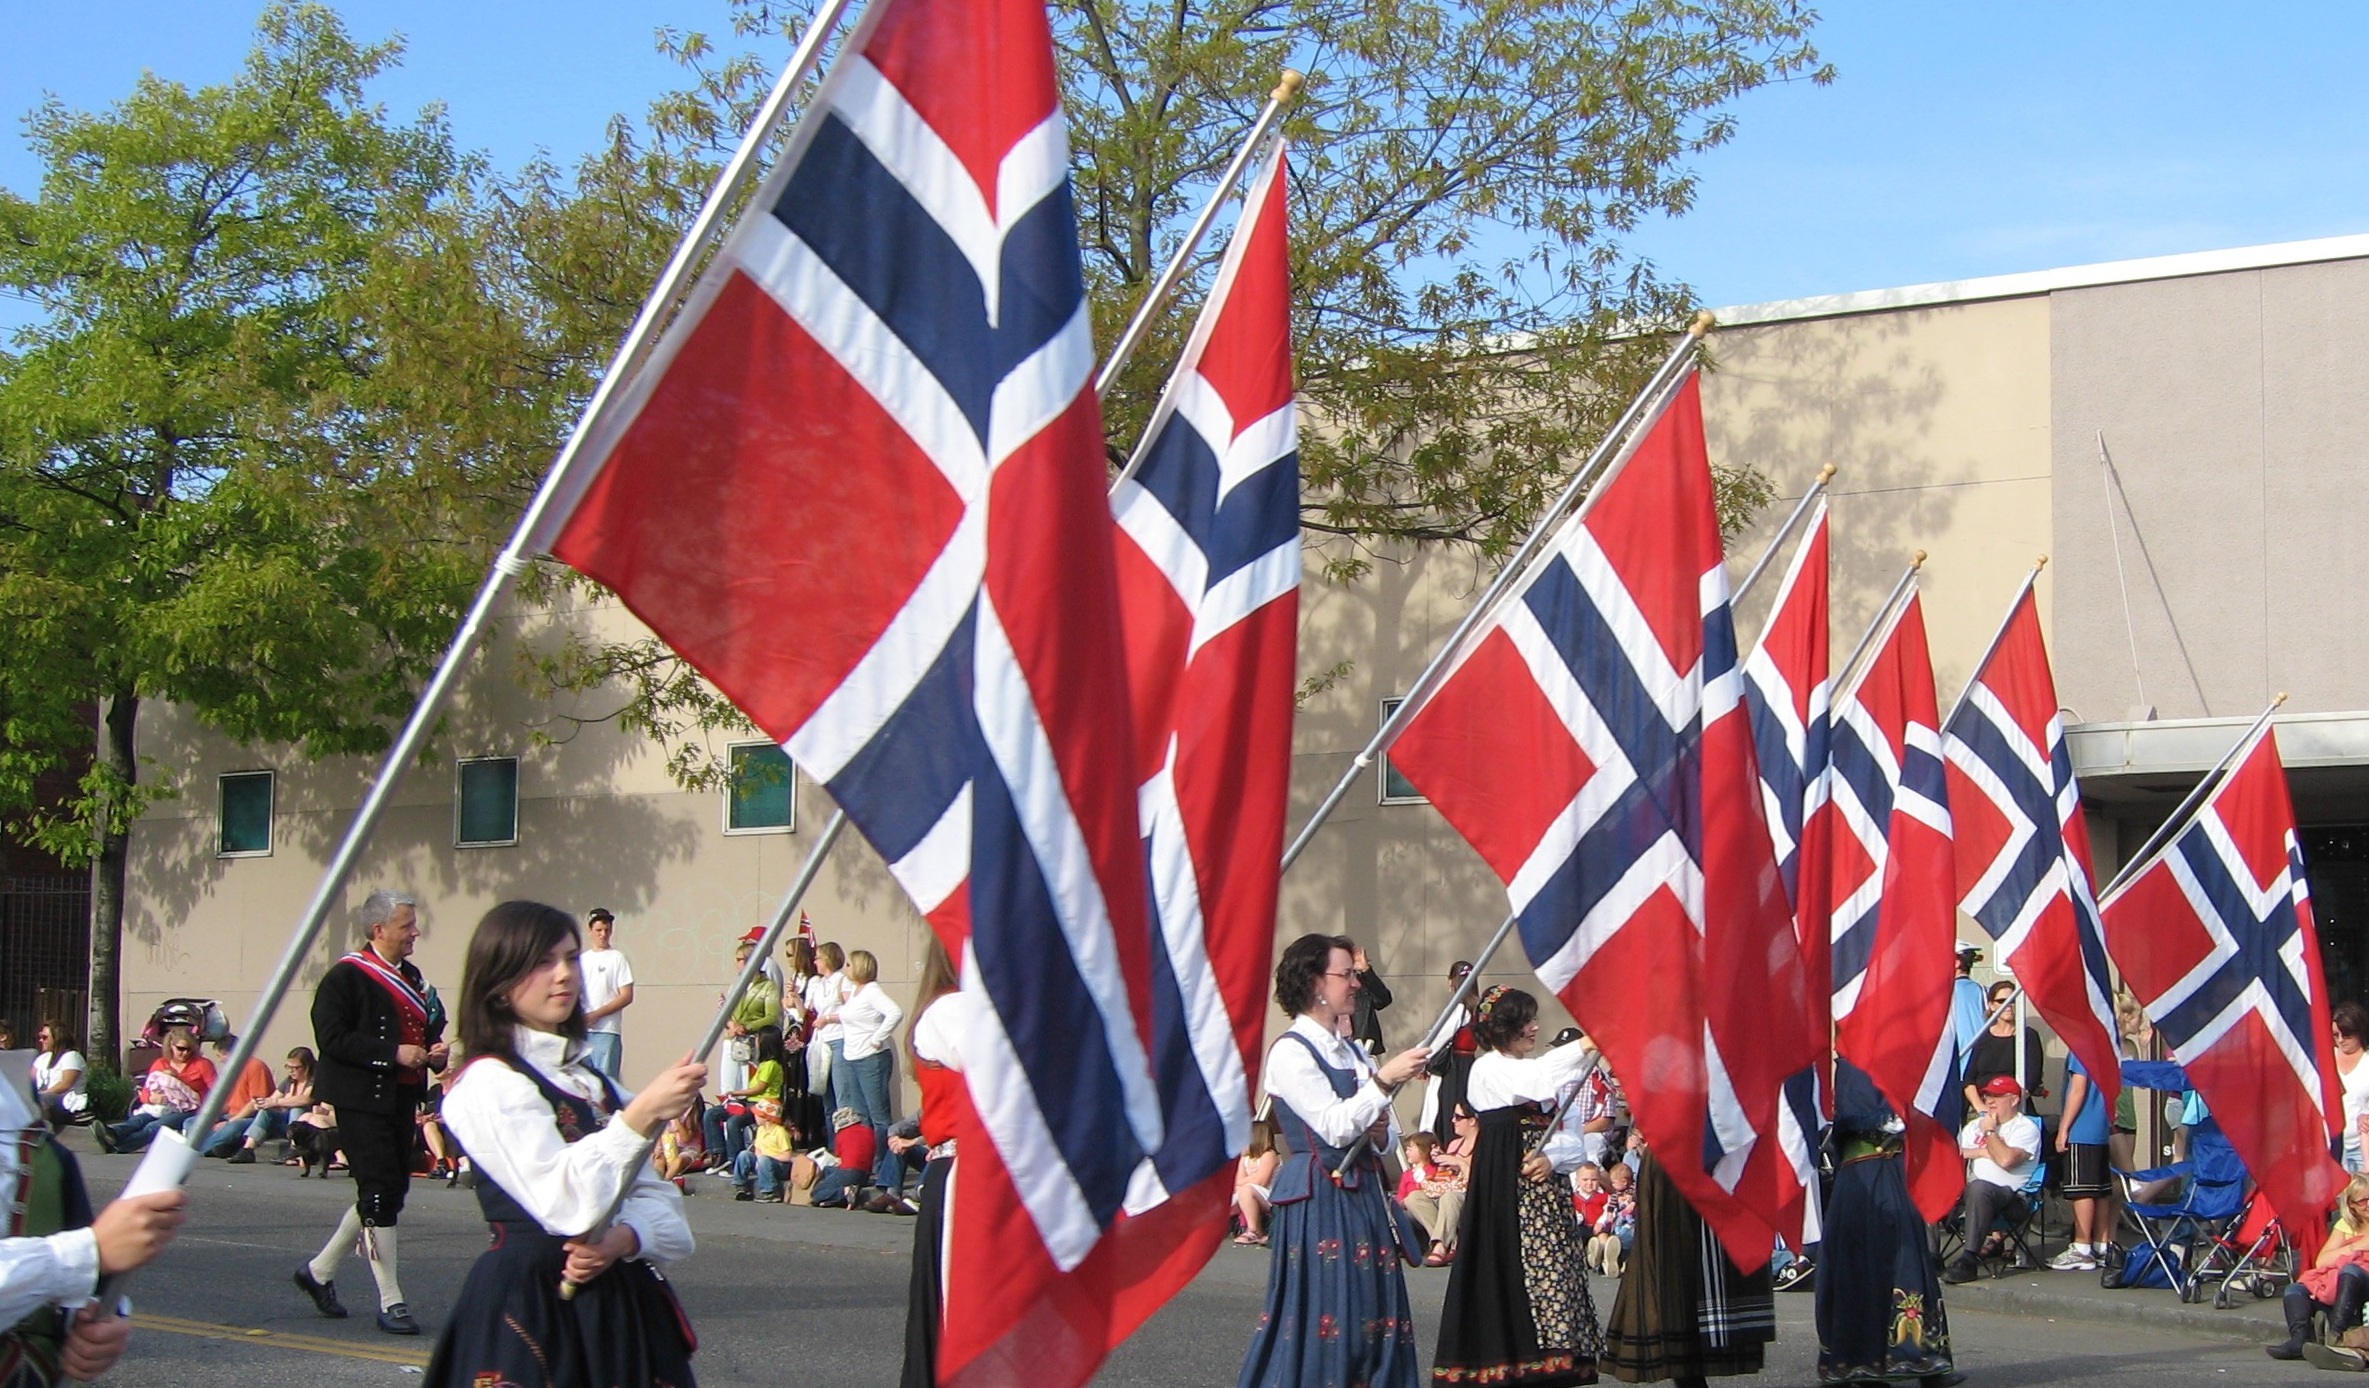 Norwegians celebrate Constitution Day every May 17